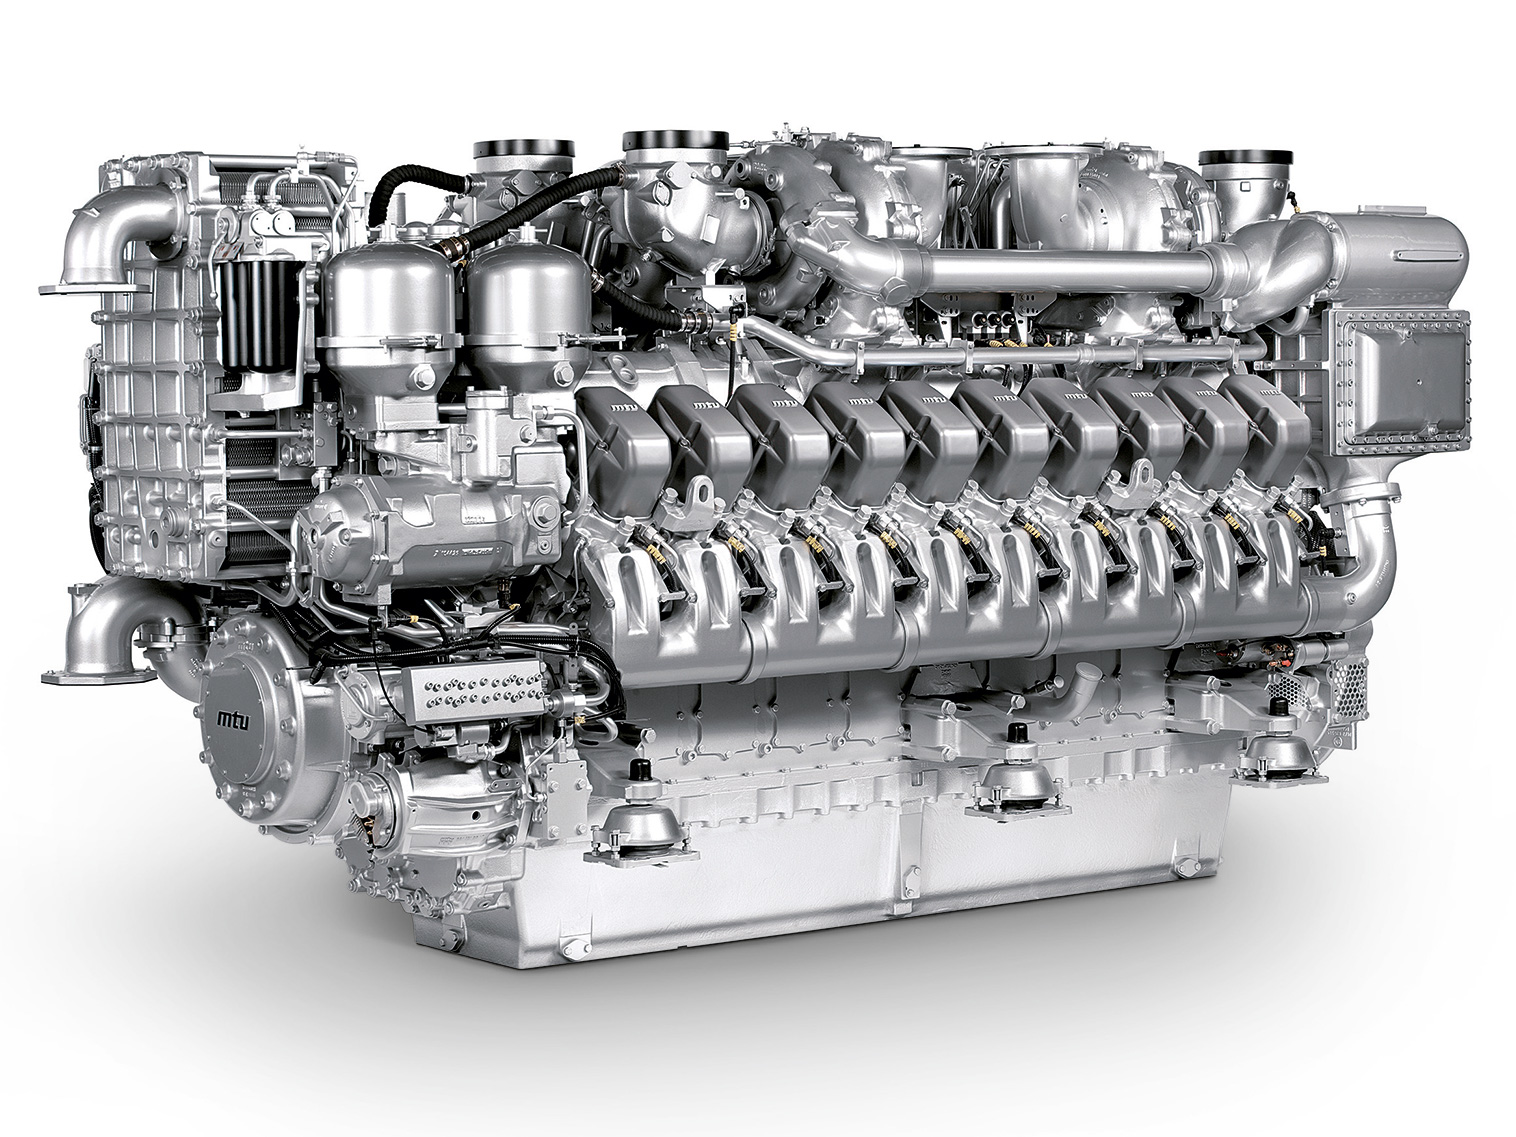 Rolls-Royce has been selected to supply its mtu naval generator sets for phase one of the U.S. Navy’s Constellation class frigate program. (Rolls Royce)